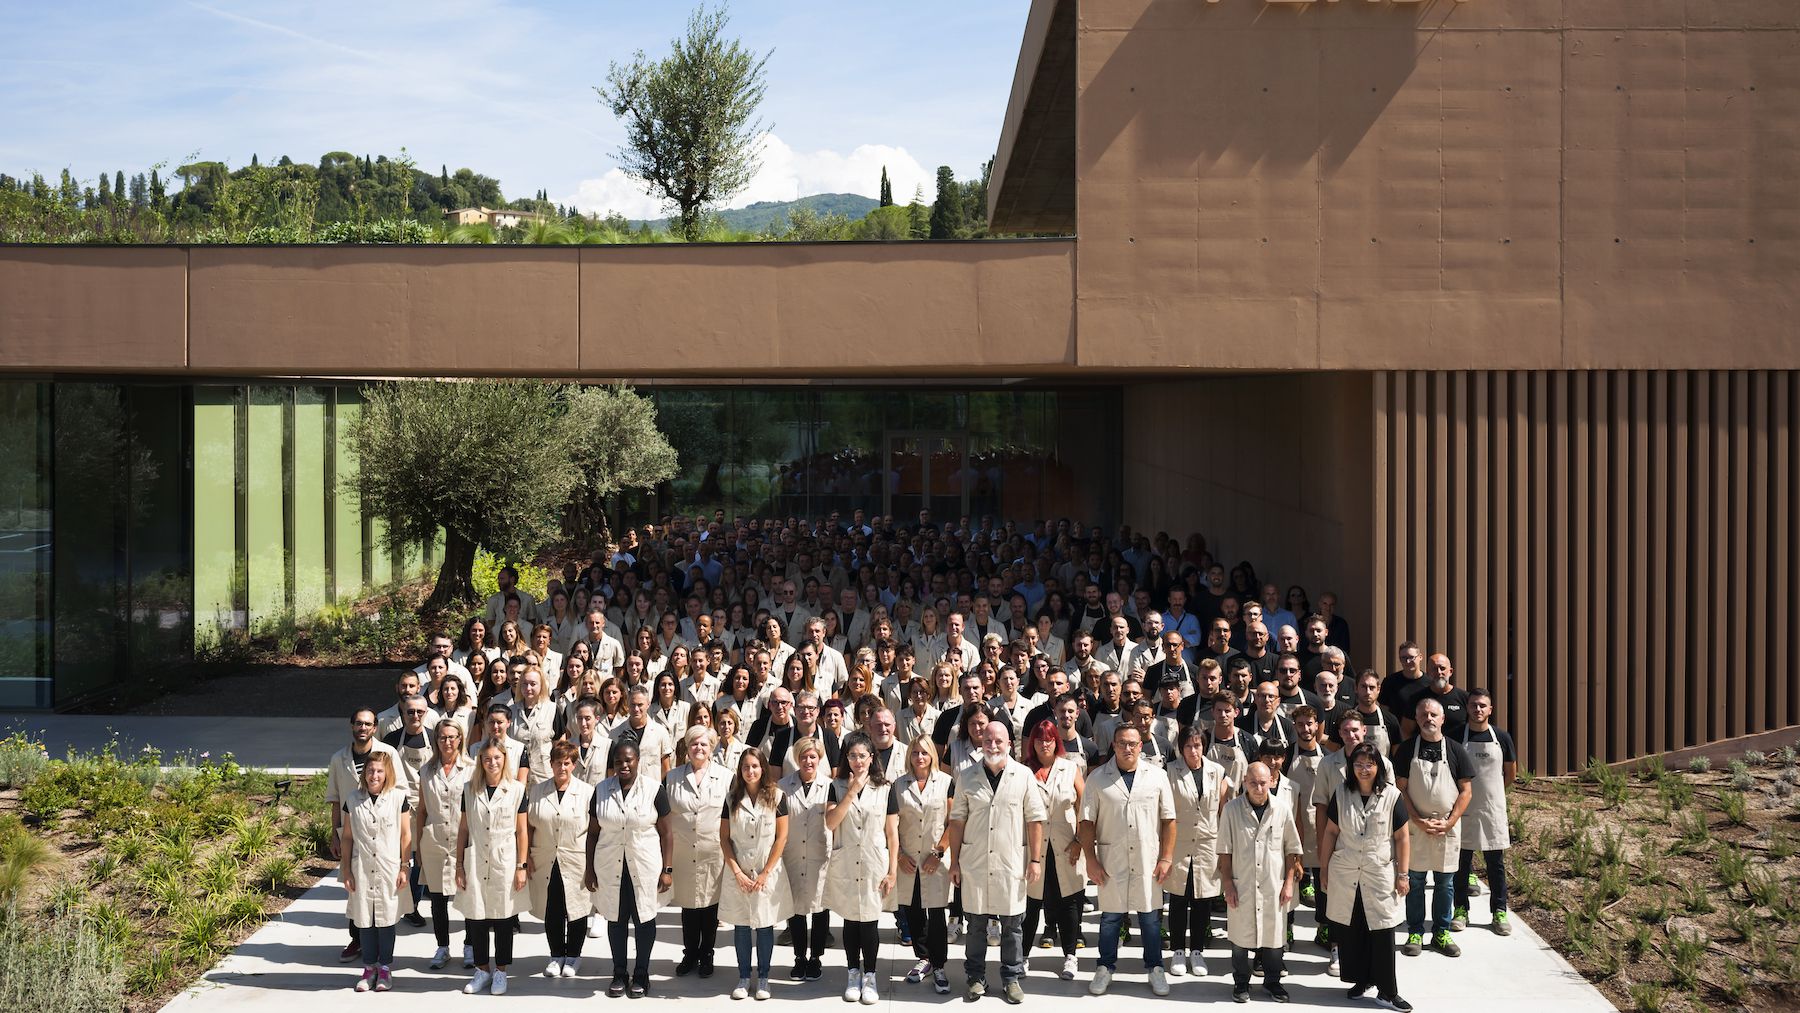 Fendi Joins Pitti Uomo as Special Guest with Show at New Tuscan Factory